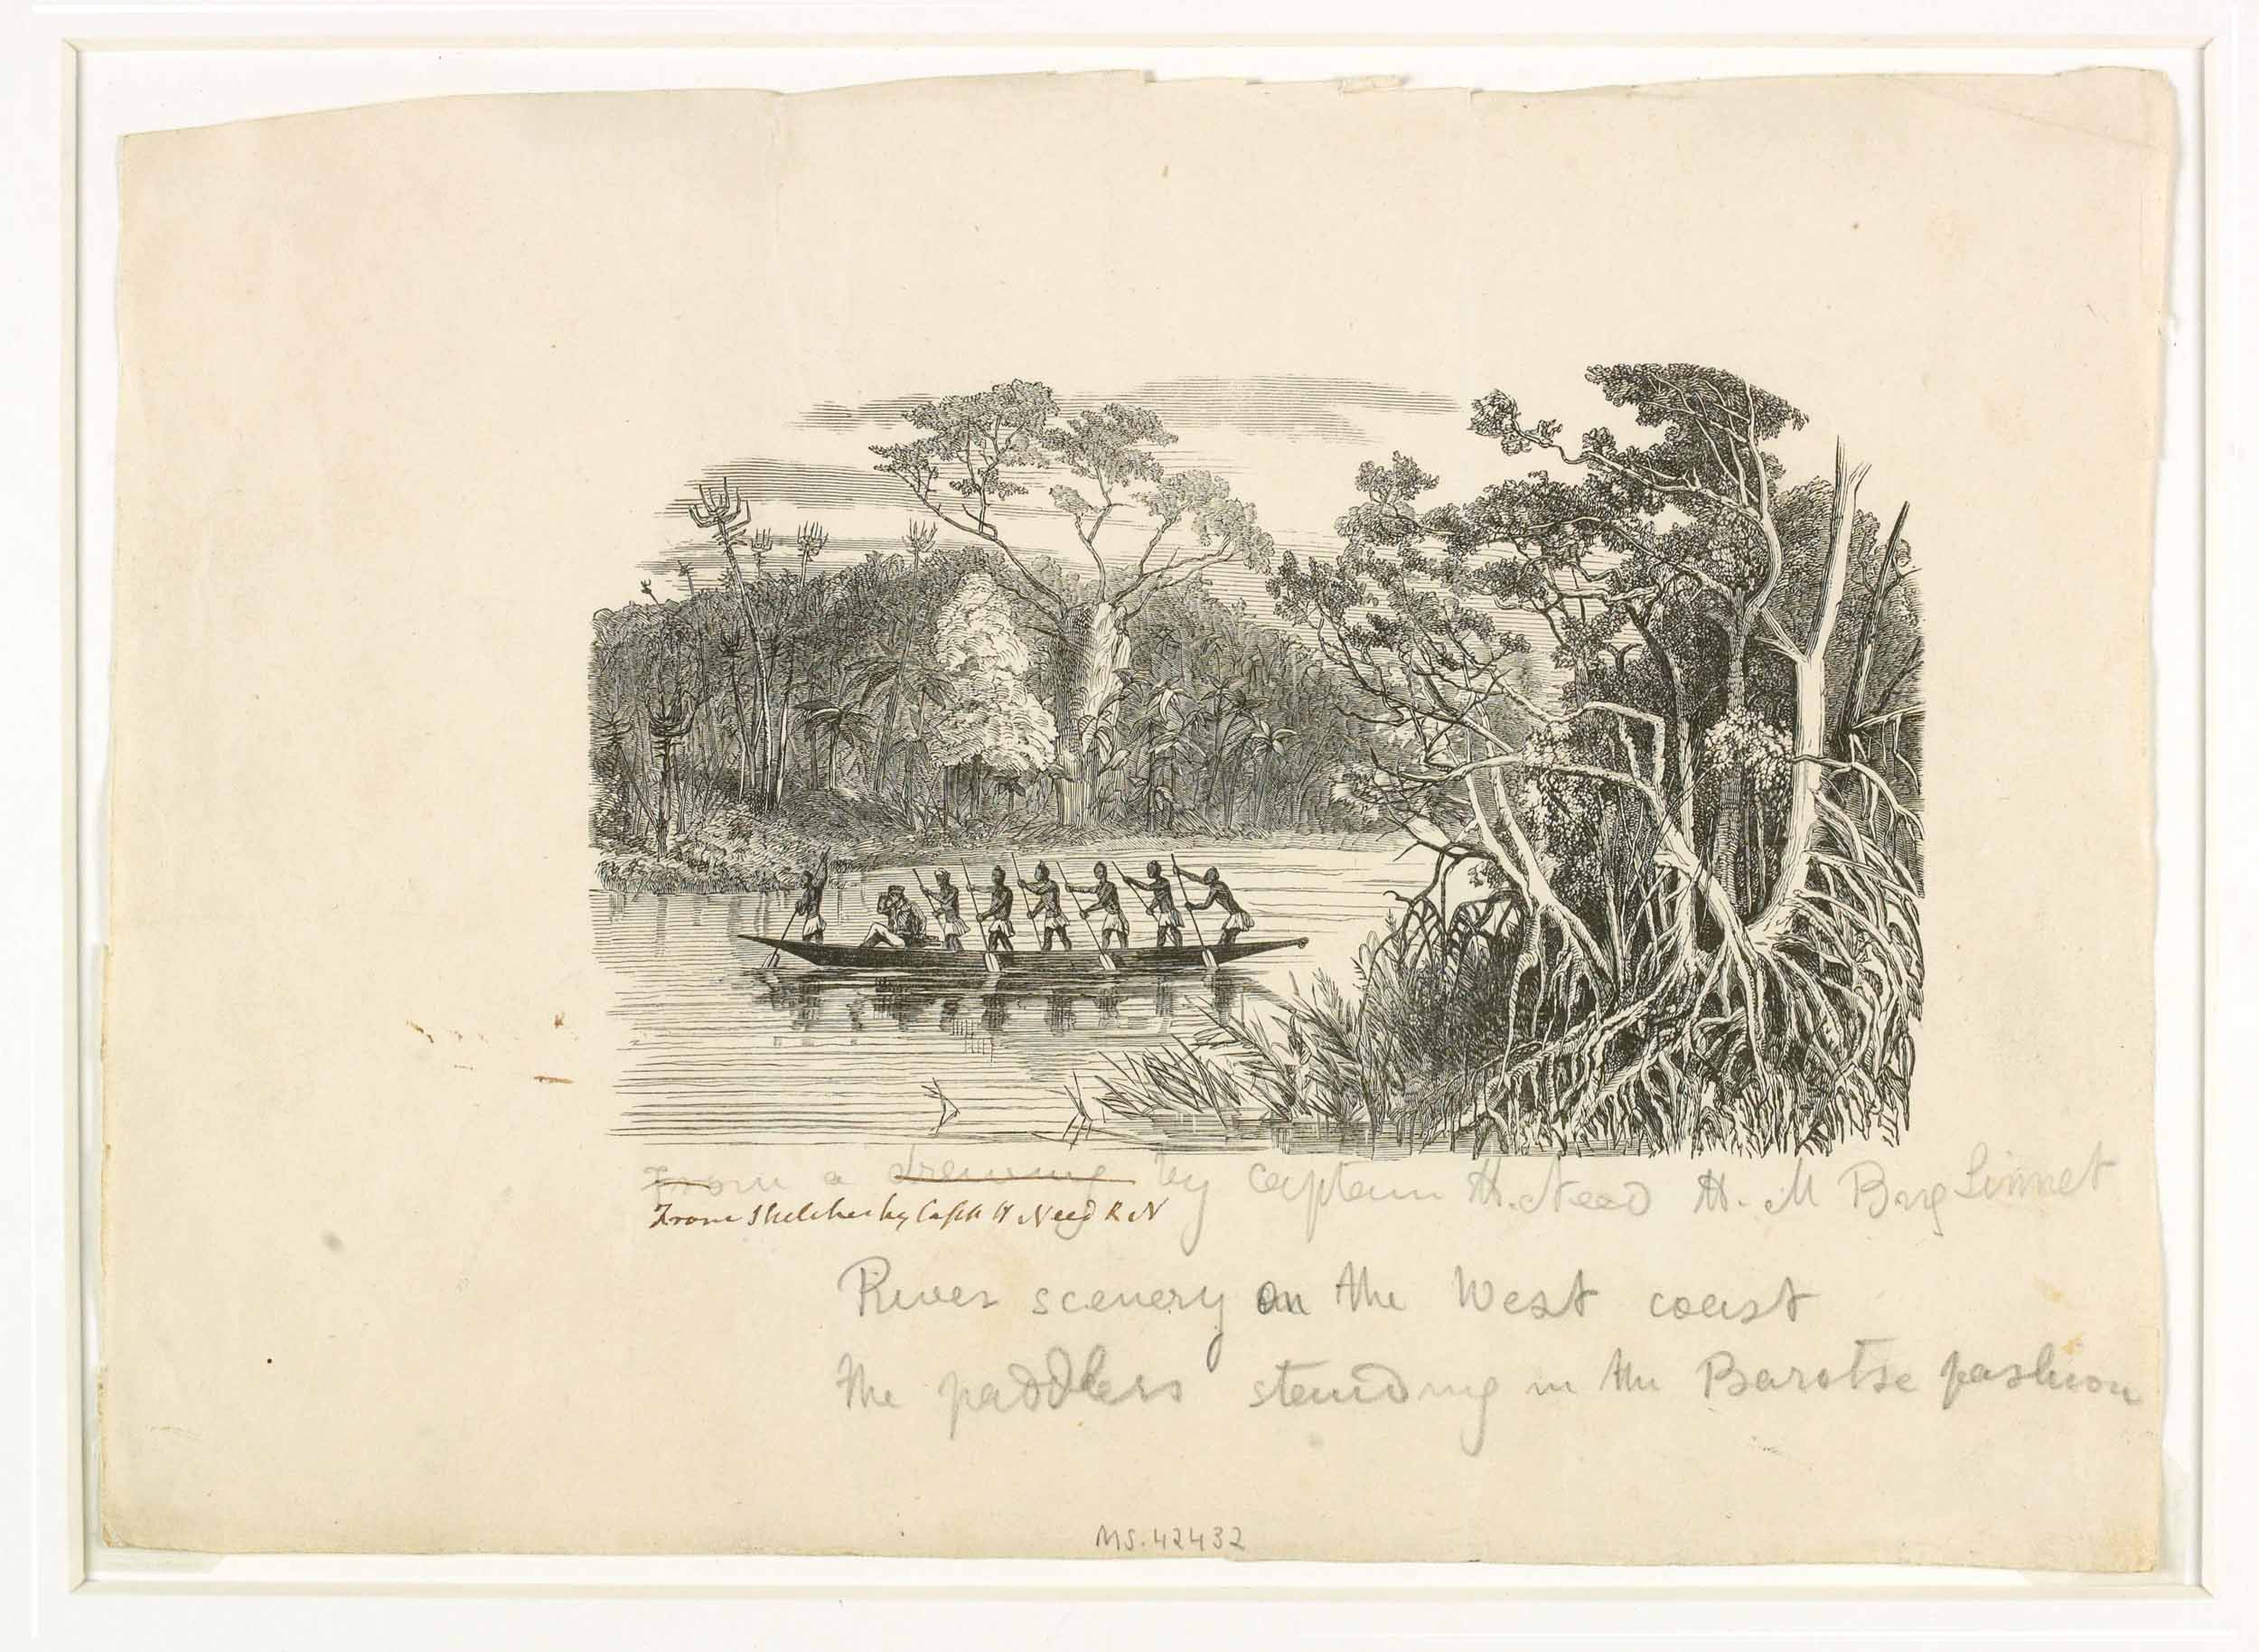 River Scenery on the West Coast (David Livingstone's Annotated Proof), c.1856-1857, by David Livingstone. Copyright National Library of Scotland. Creative Commons Share-alike 2.5 UK: Scotland (https://creativecommons.org/licenses/by-nc-sa/2.5/scotland/).